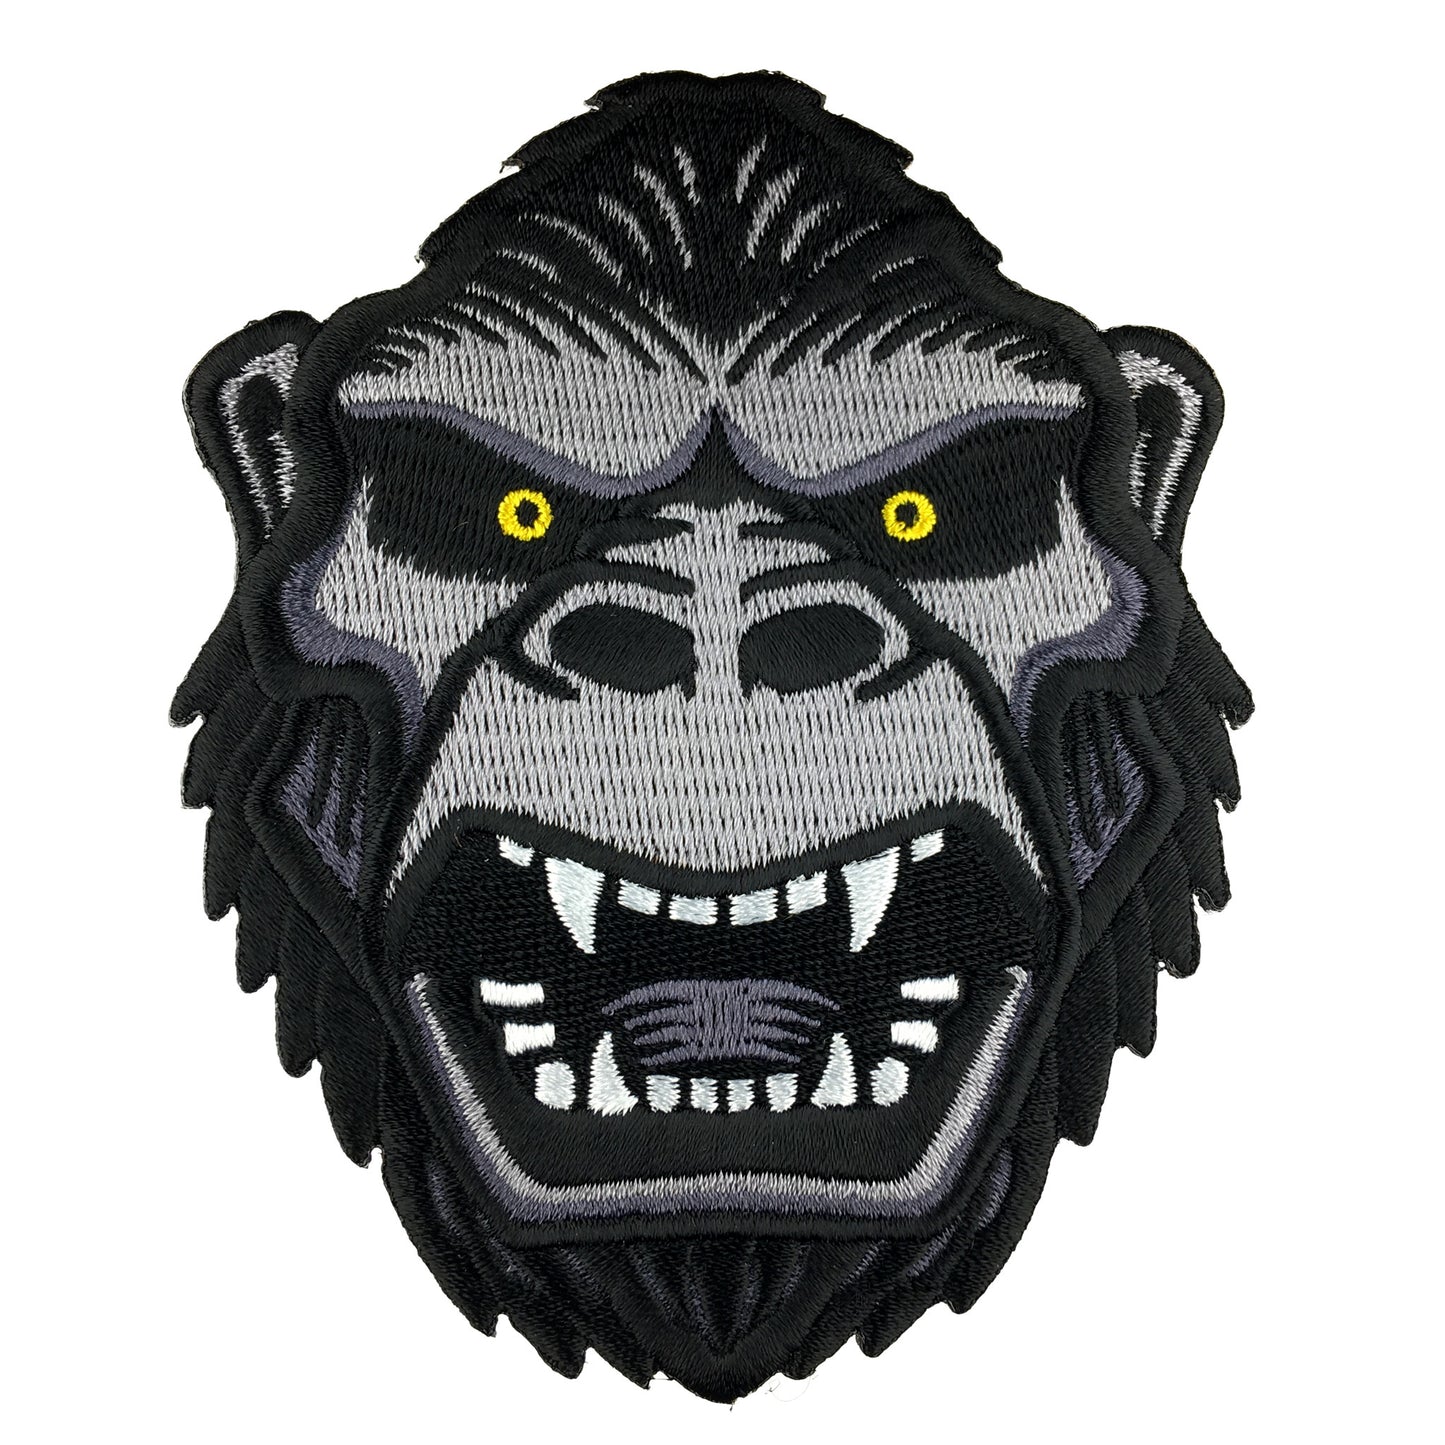 King Kong gorilla horror monster head embroidered patch by Monsterologist